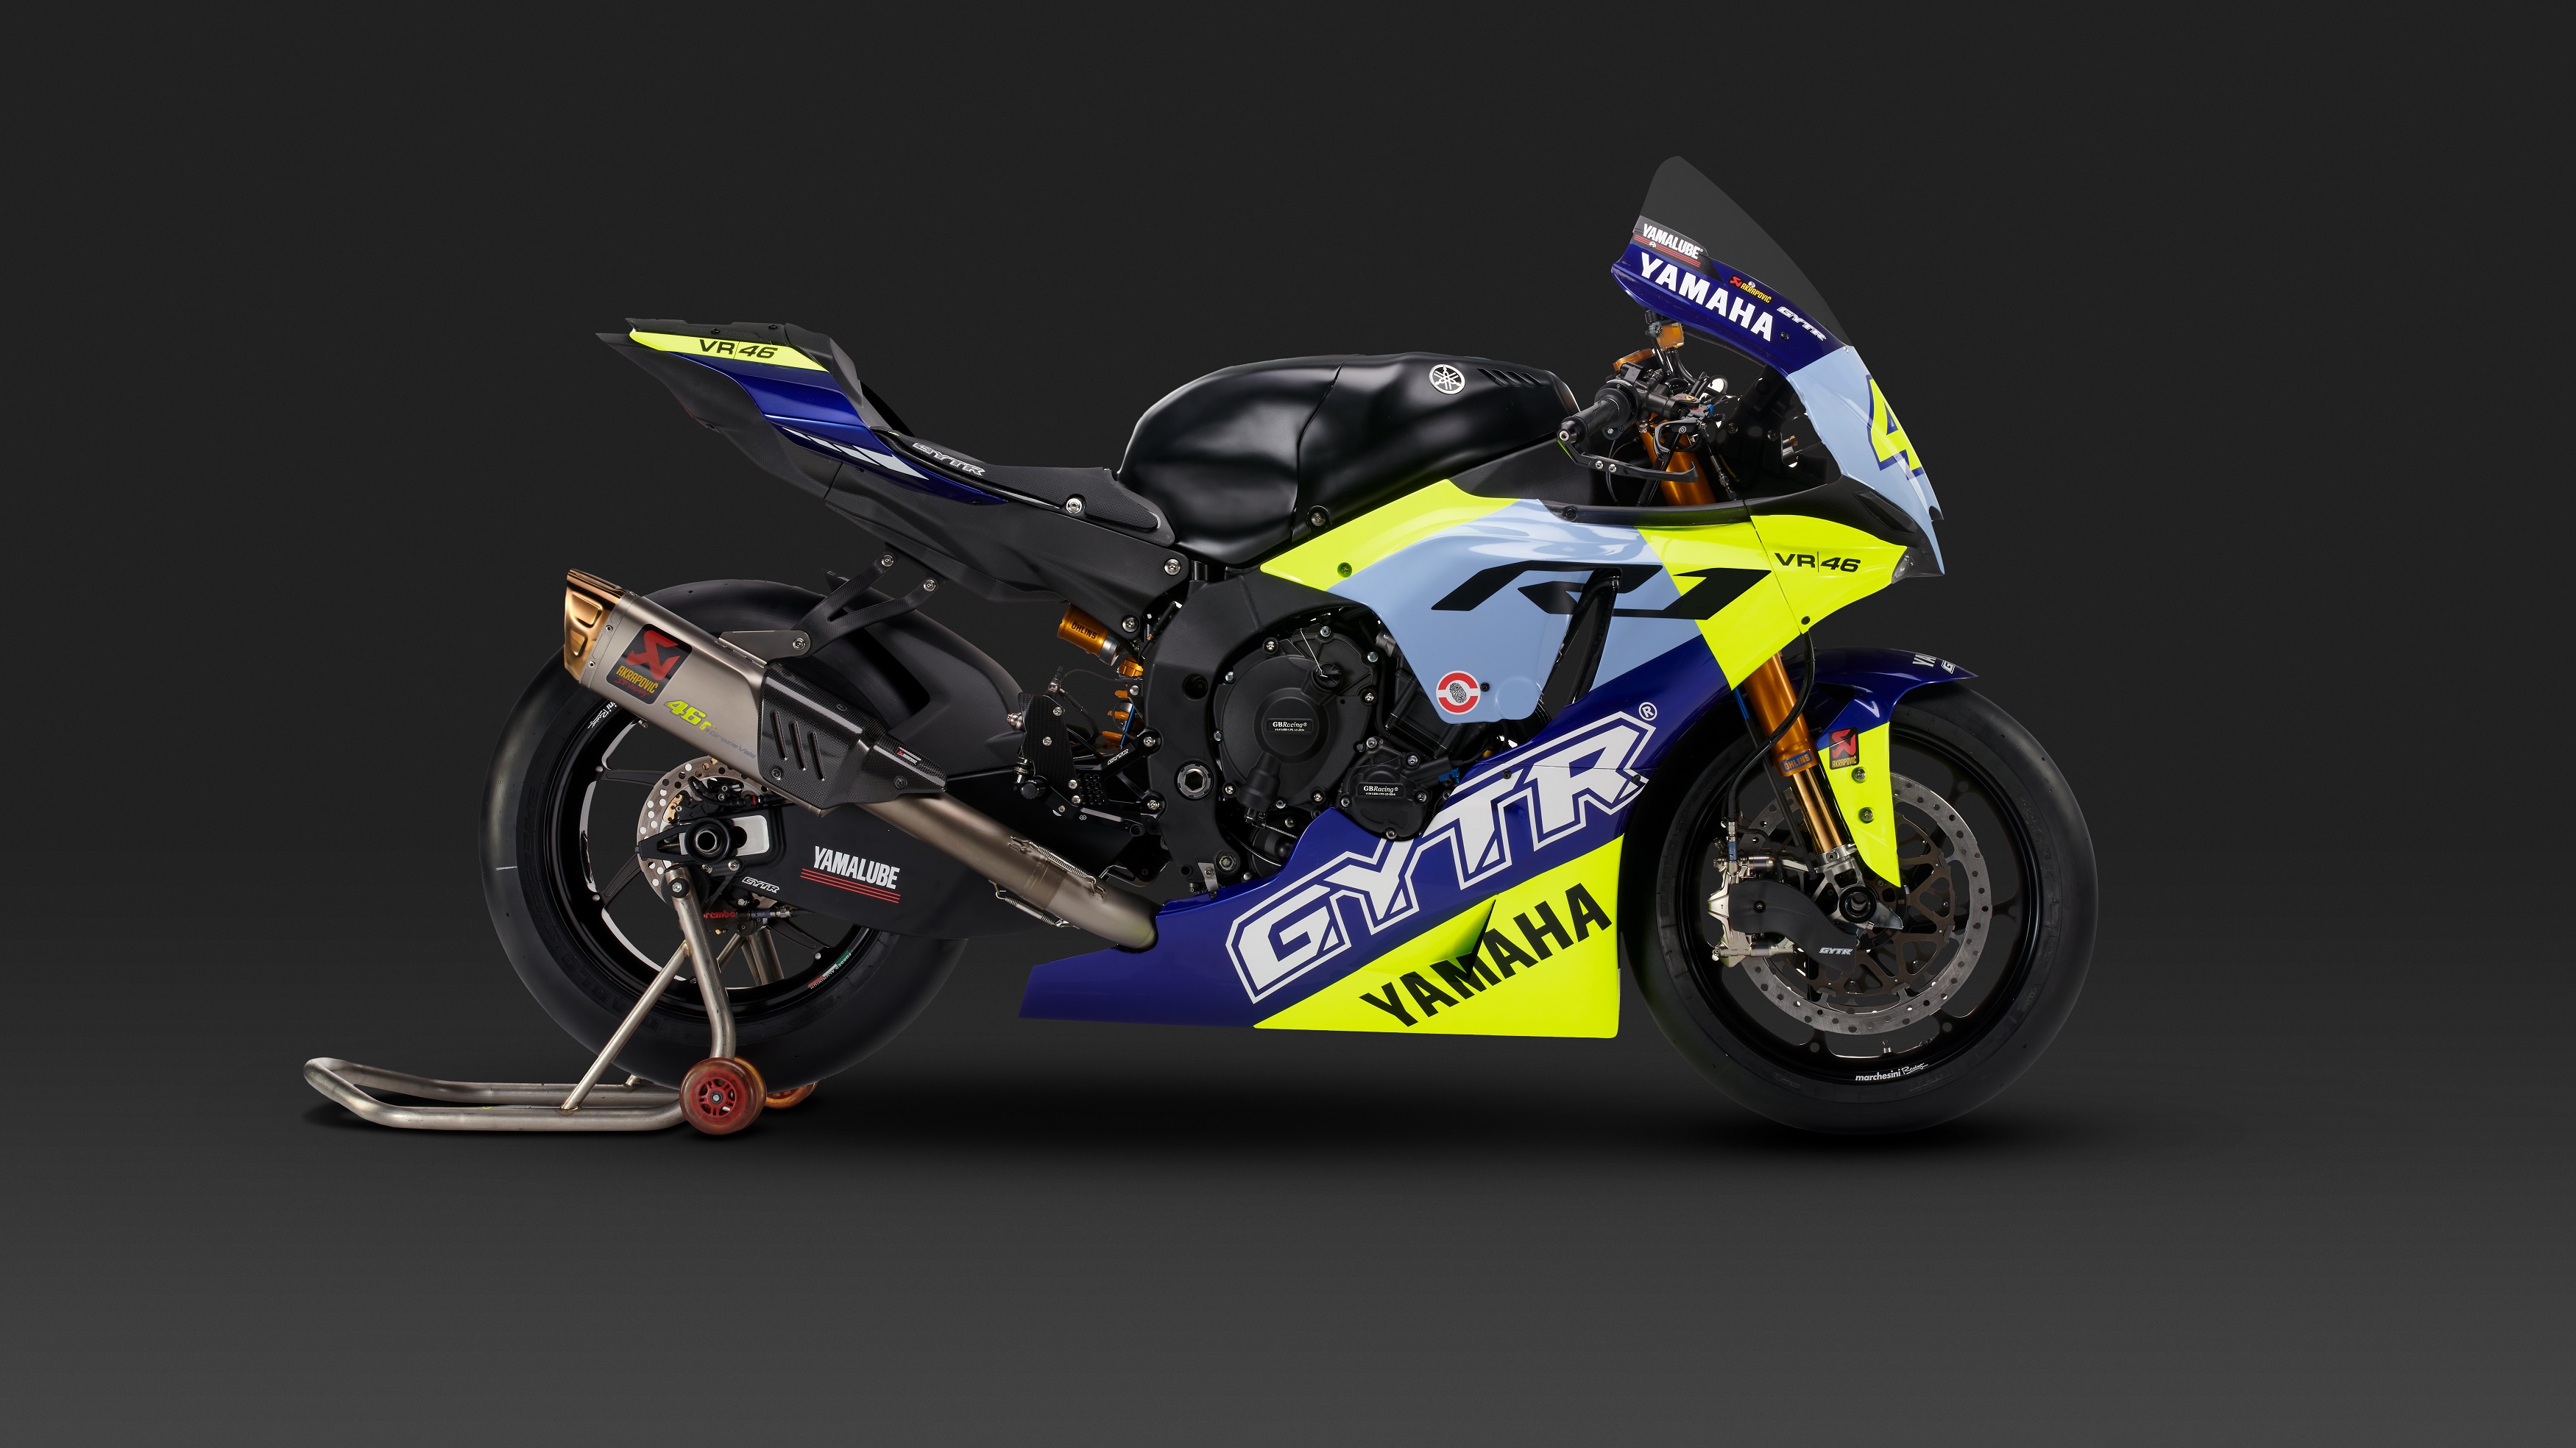 Yamaha R1 Rossi Edition | vlr.eng.br